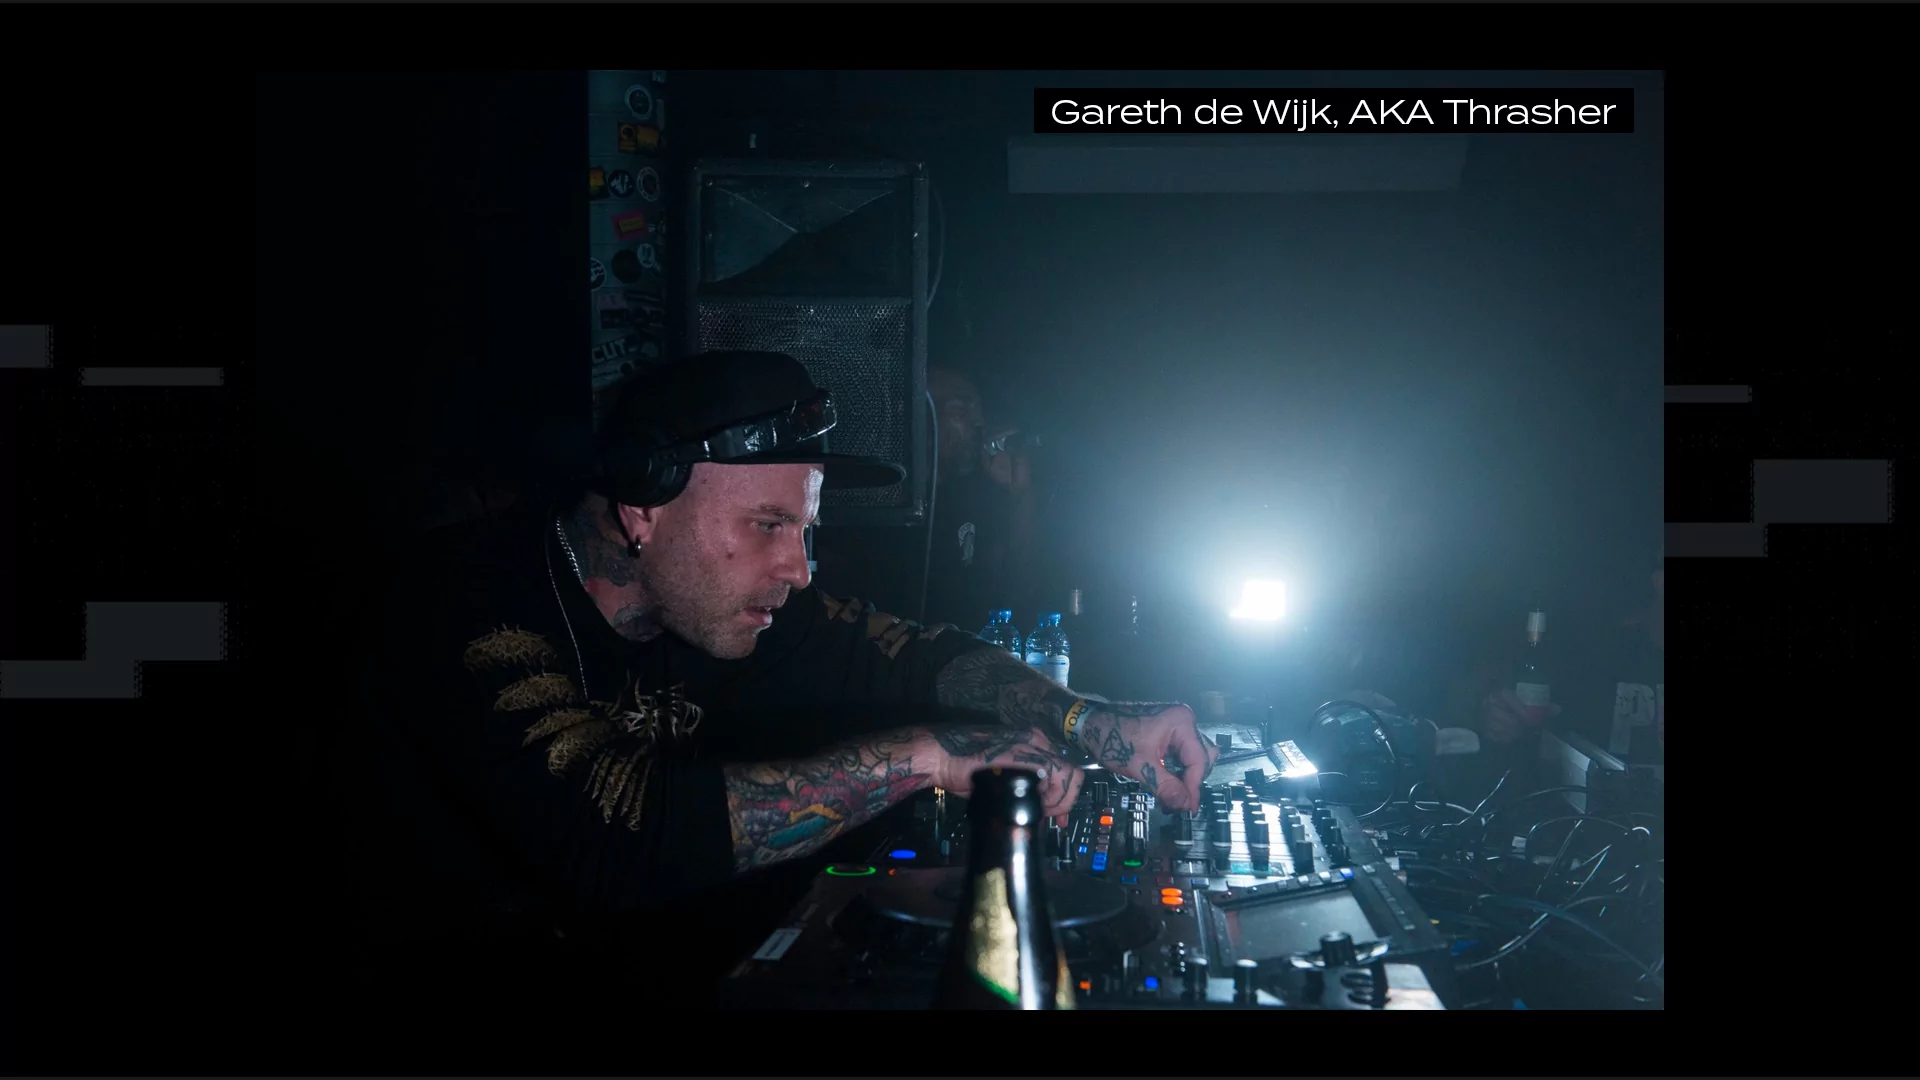 Photo of Gareth de Wijk, aka Thrasher, leaning over CDJs DJing. A single spotlight shines on him. He's wearing a baseball cap and is covered in tattoos